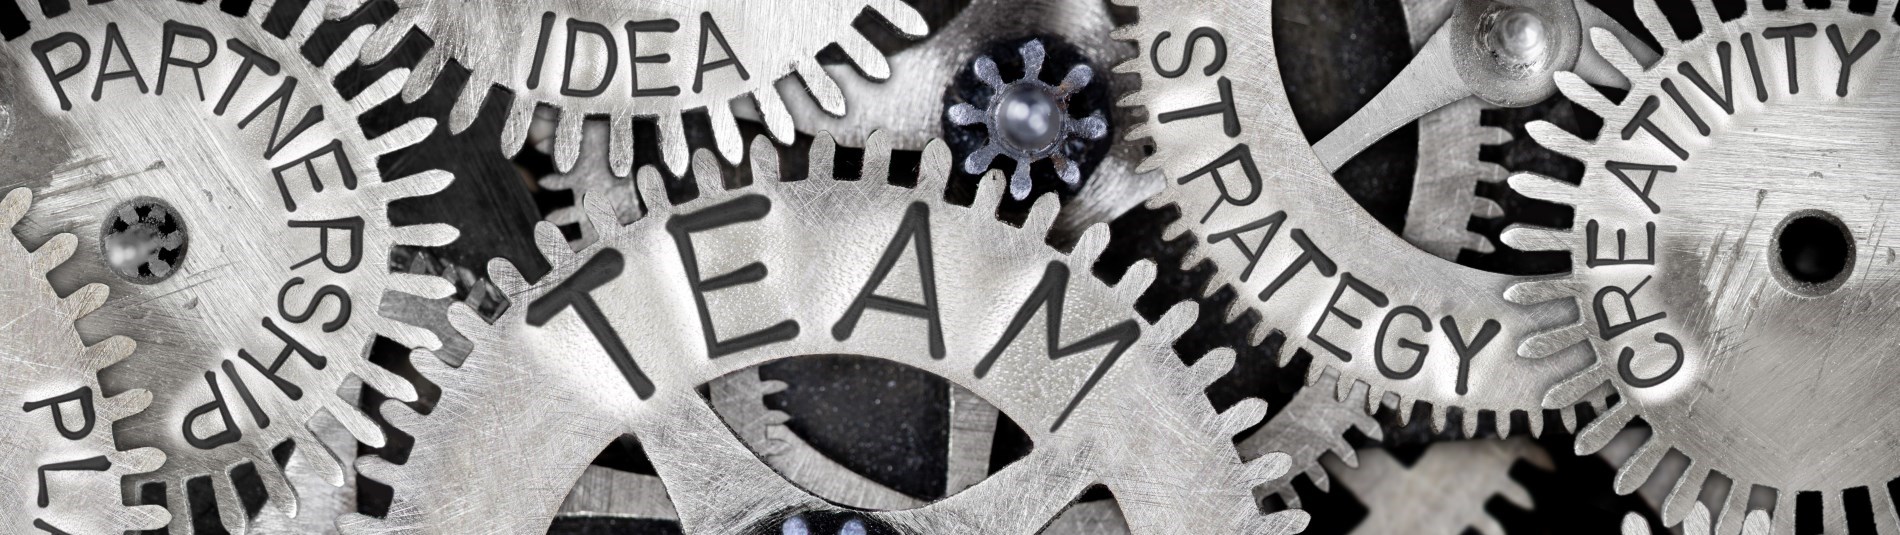 gears with management words